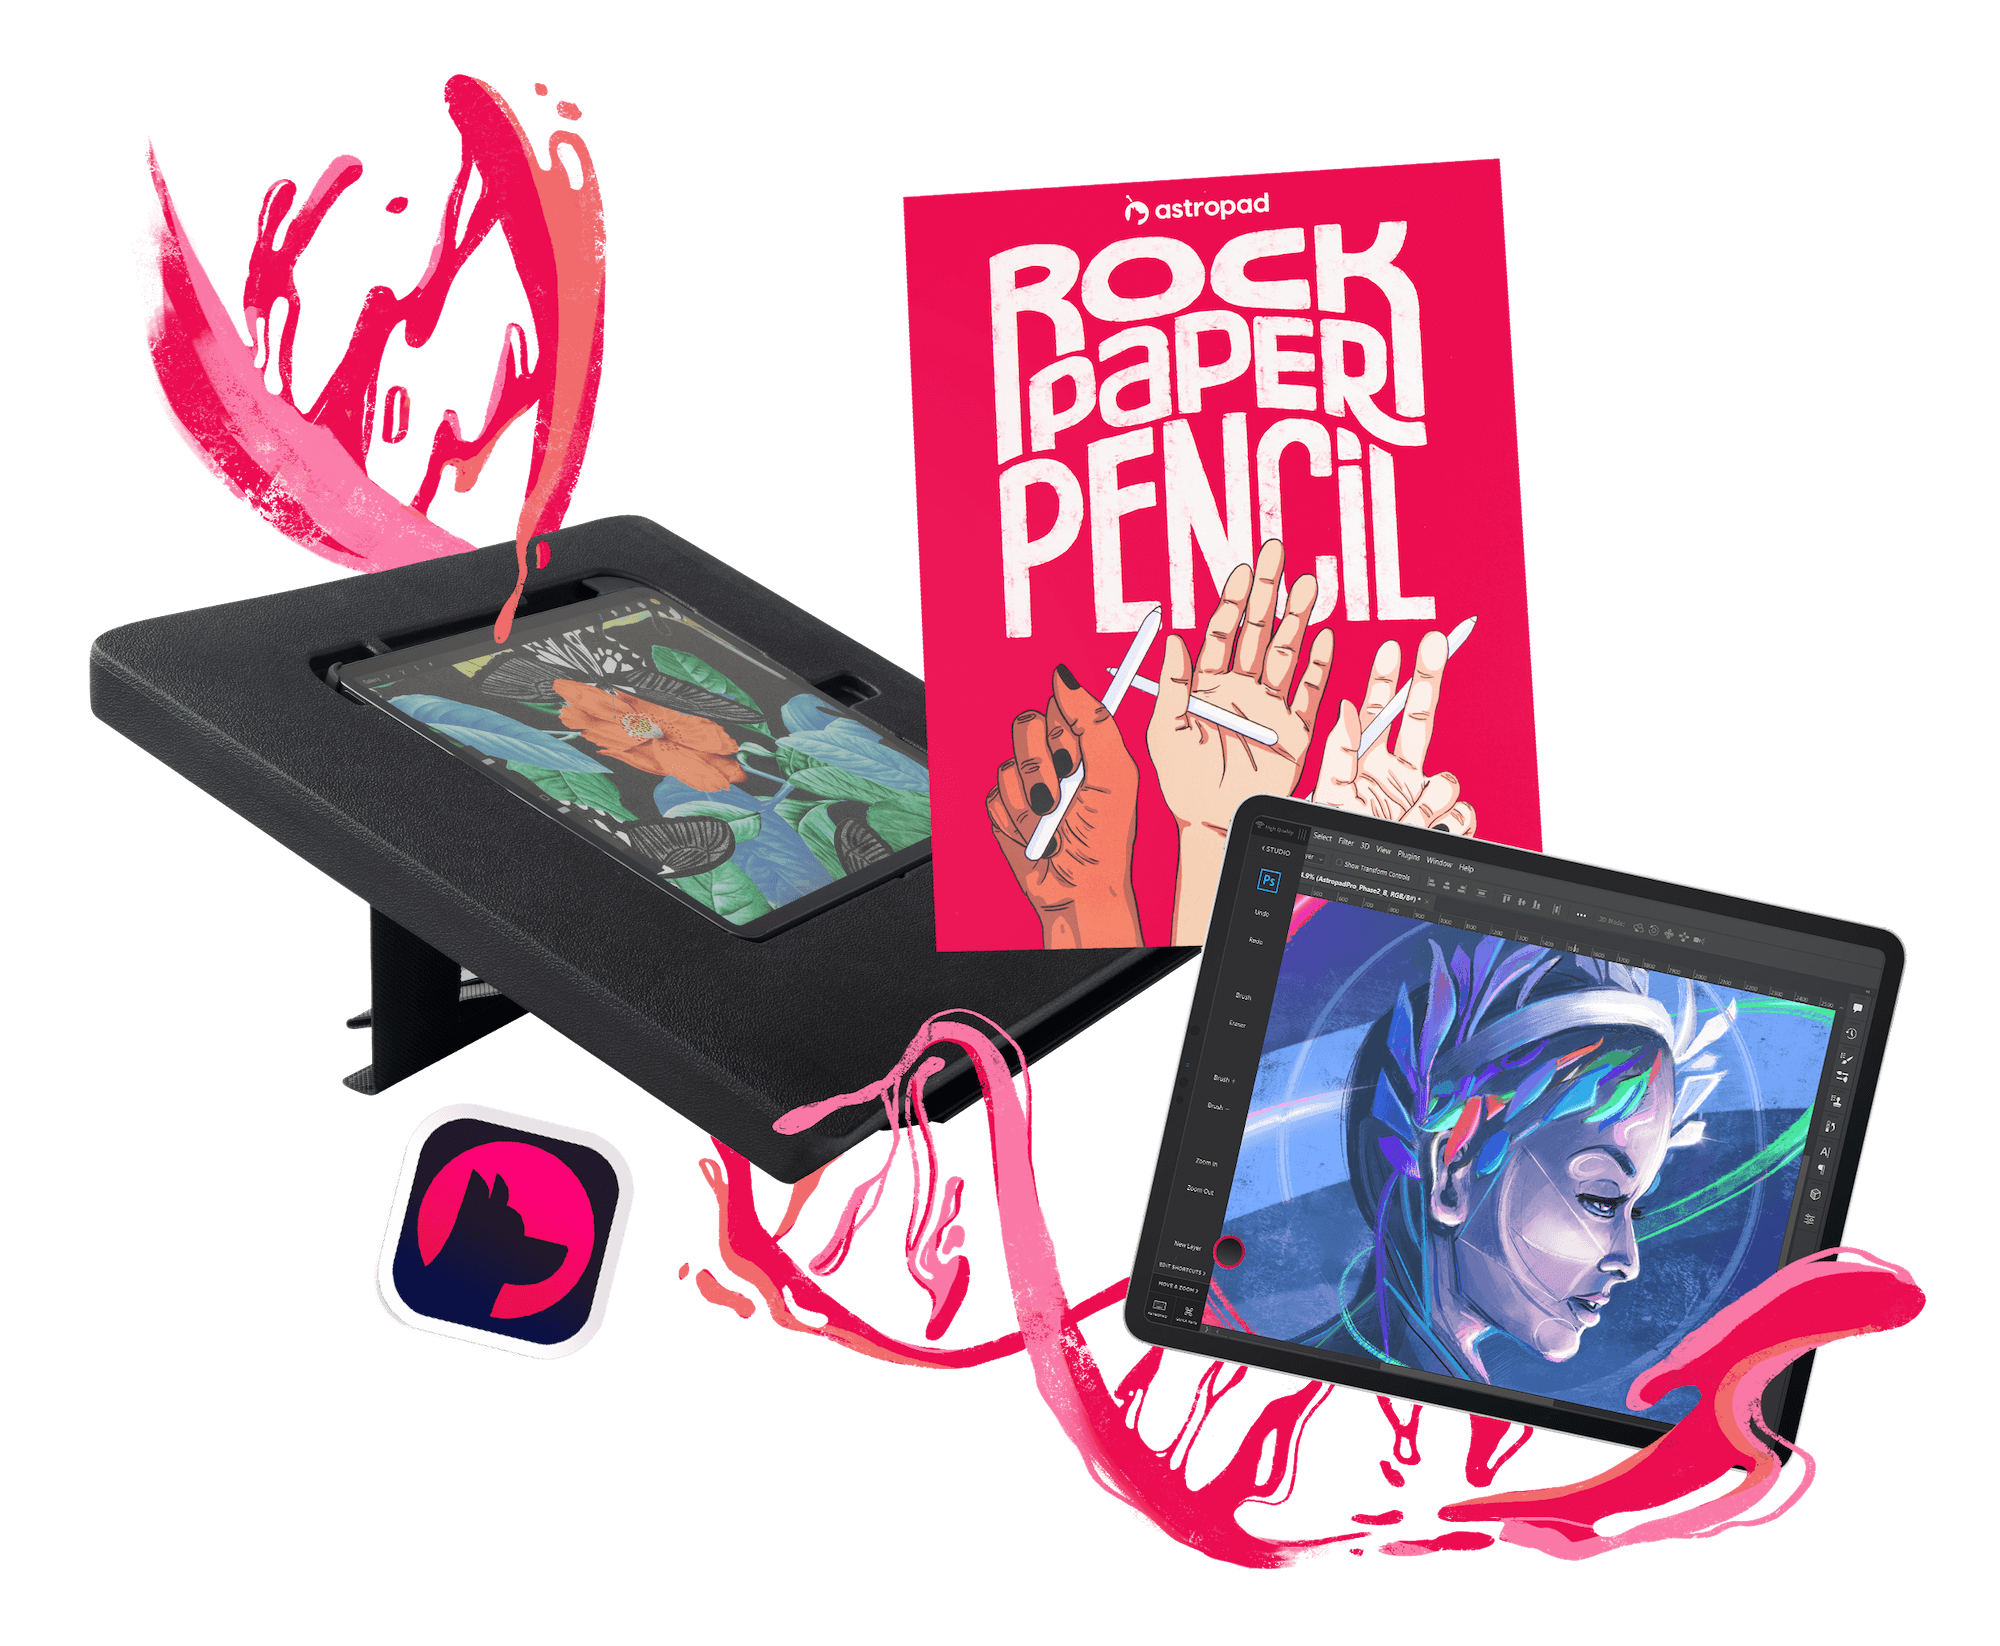 Rock Paper Pencil is the new iPad accessory I need